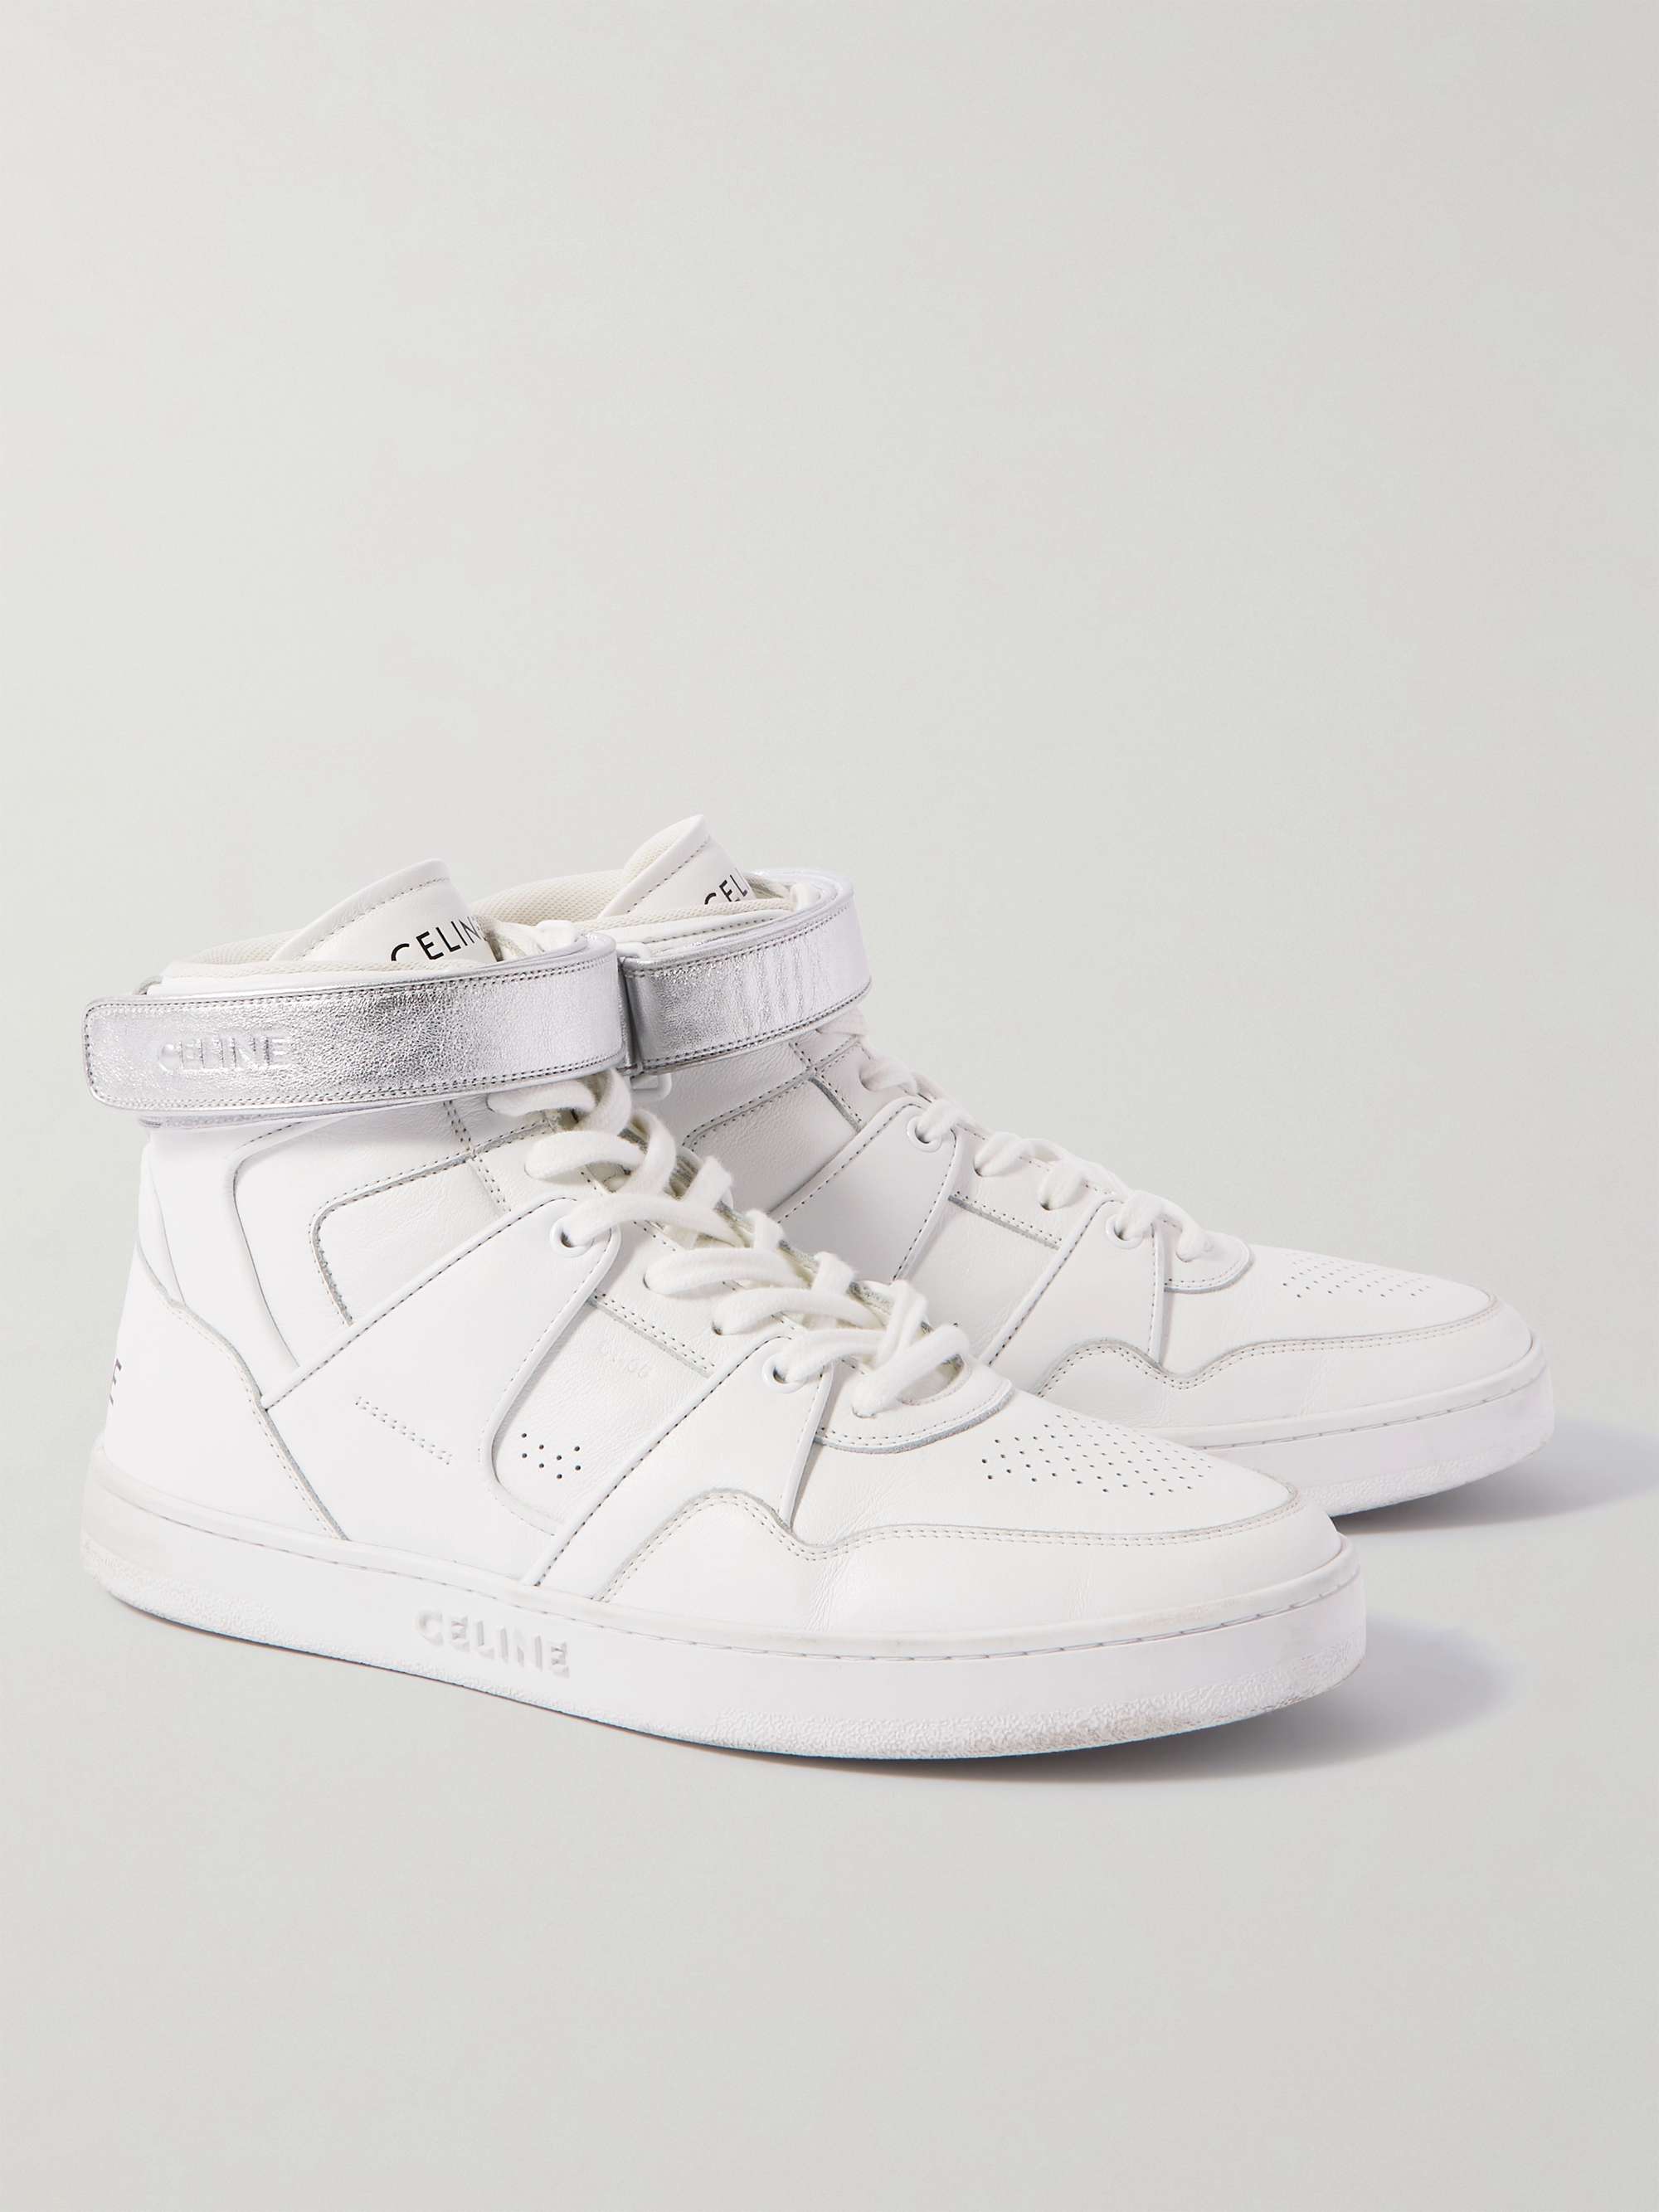 CELINE HOMME CT-05 Distressed Leather High-Top Sneakers